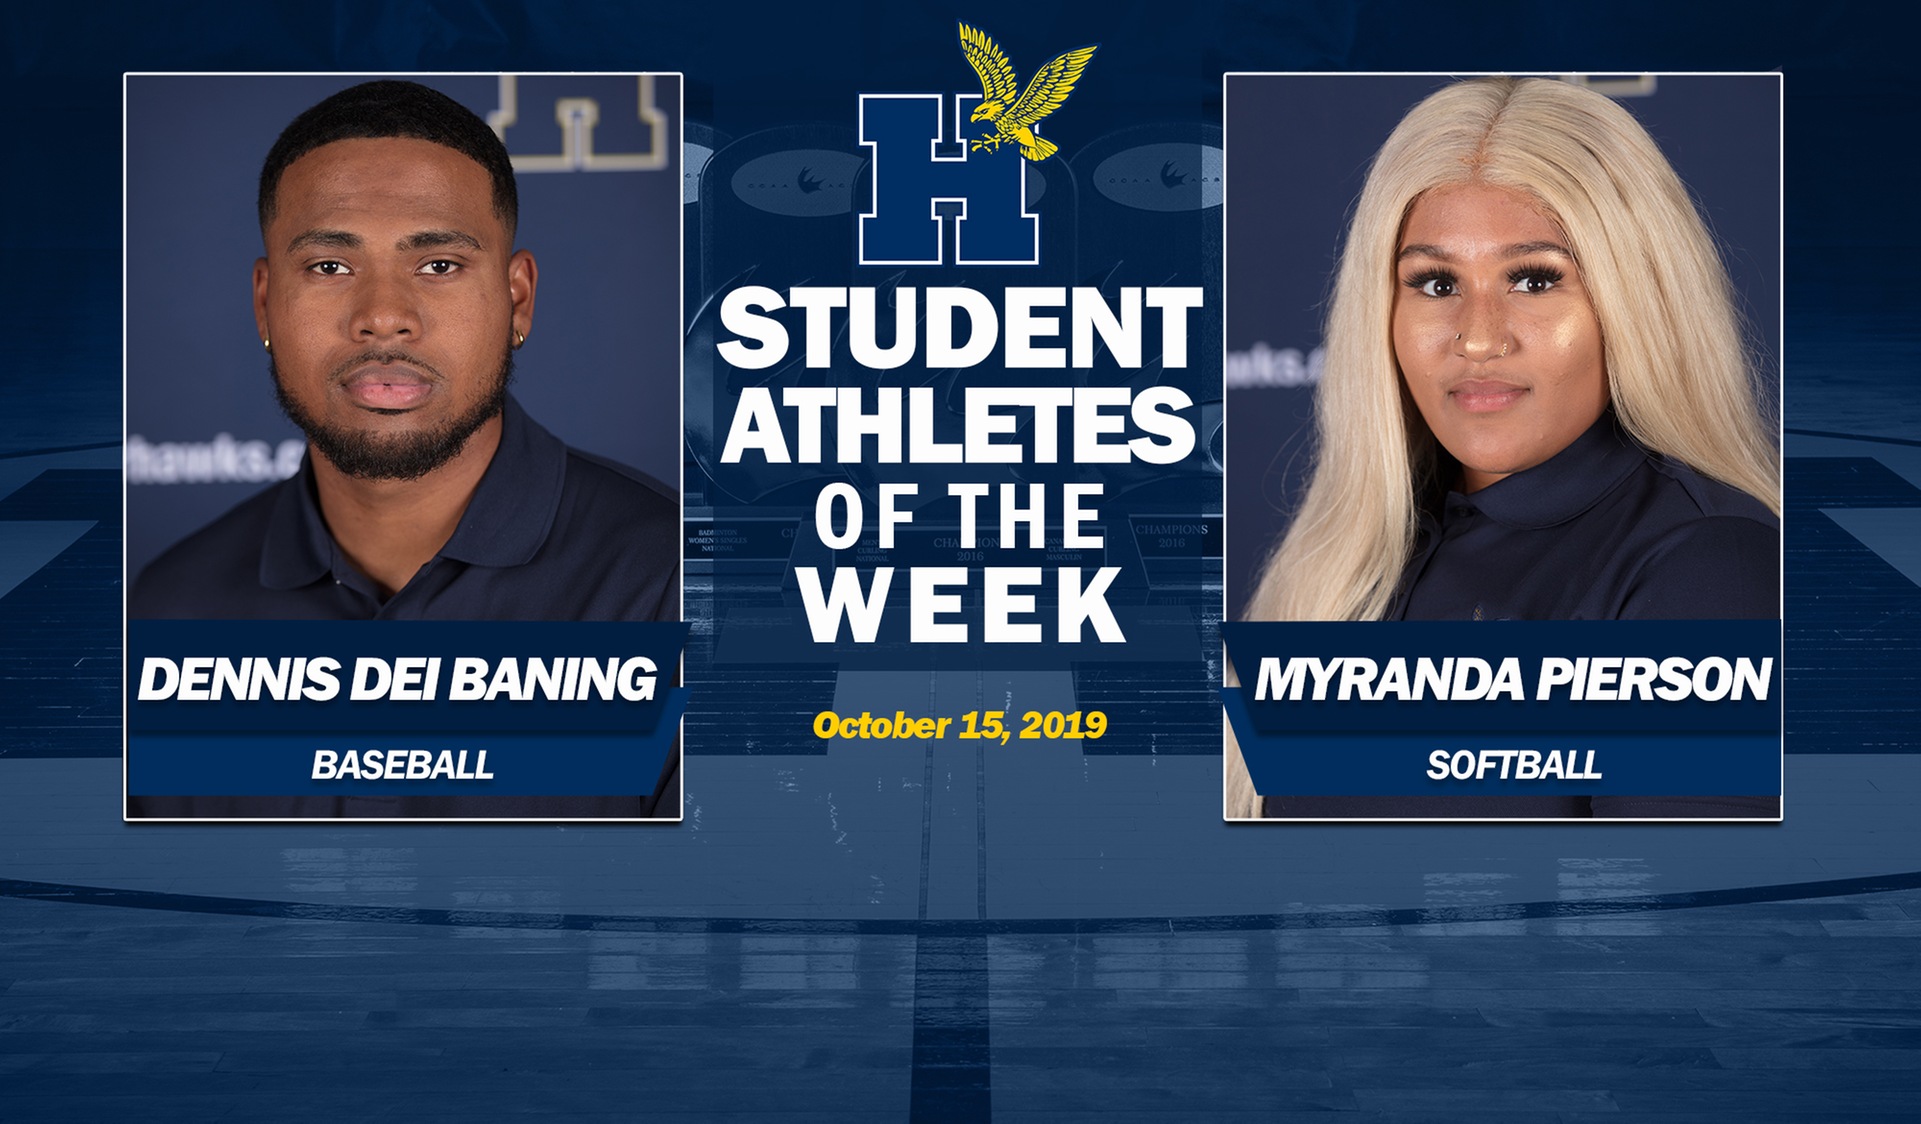 Dei Baning, Pierson Earn Humber Student-Athlete of the Week Honours